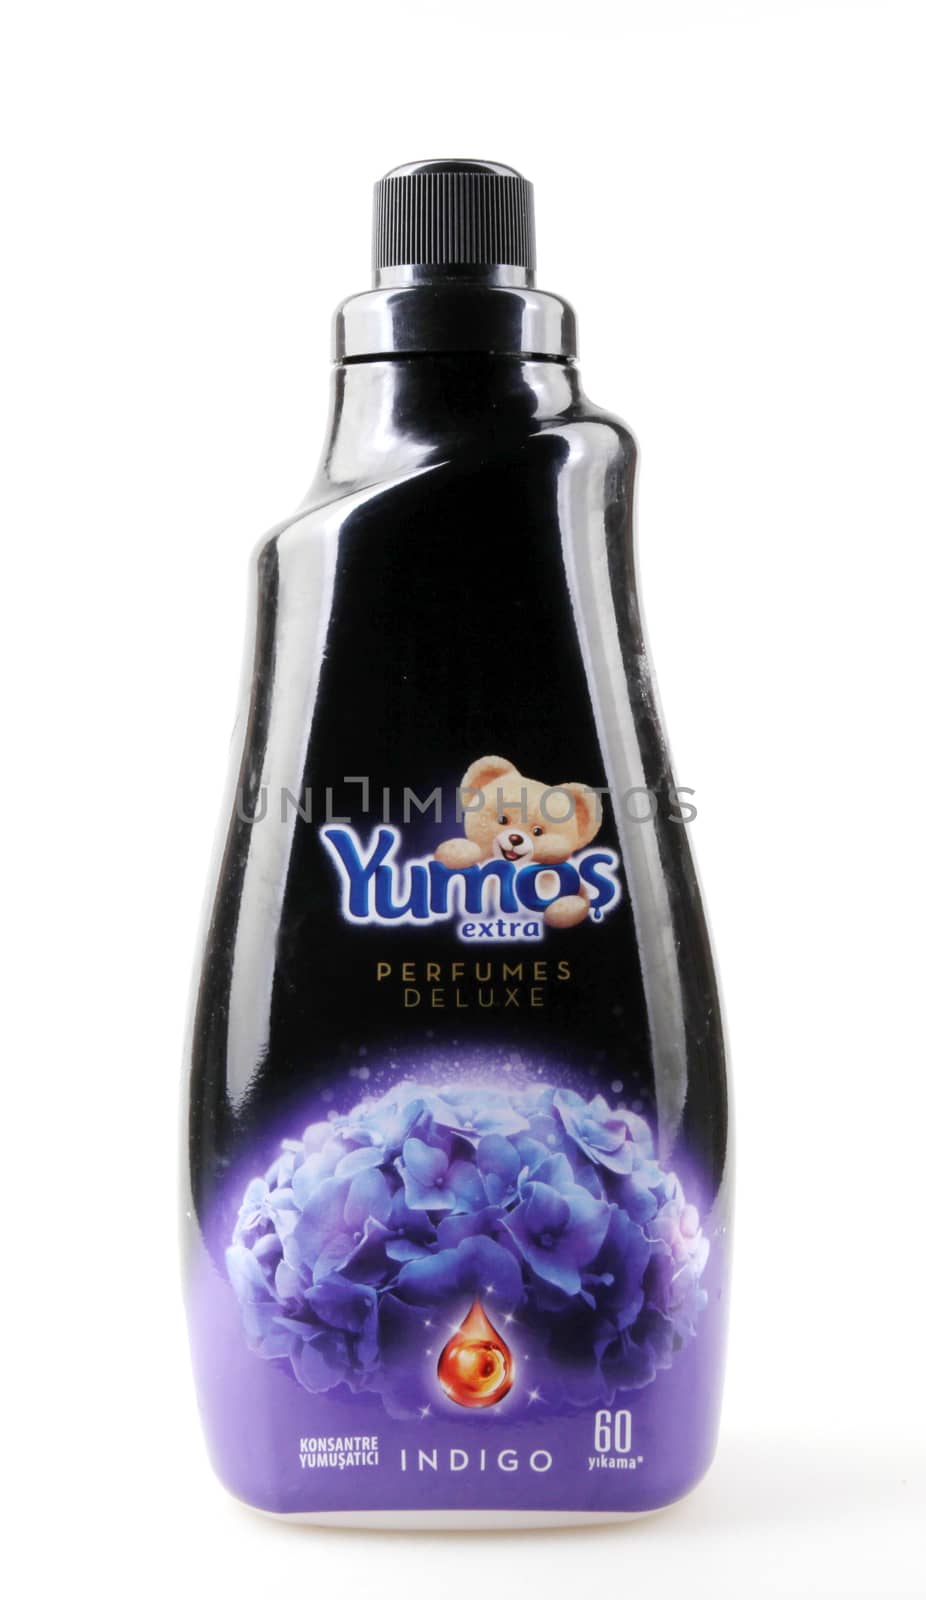 Pomorie, Bulgaria - June 23, 2019: Yumoş is a brand of softeners belonging to Unilever by 2008. In 2008, it was sold to Sun Products, which is already part of Henkel. by nenovbrothers